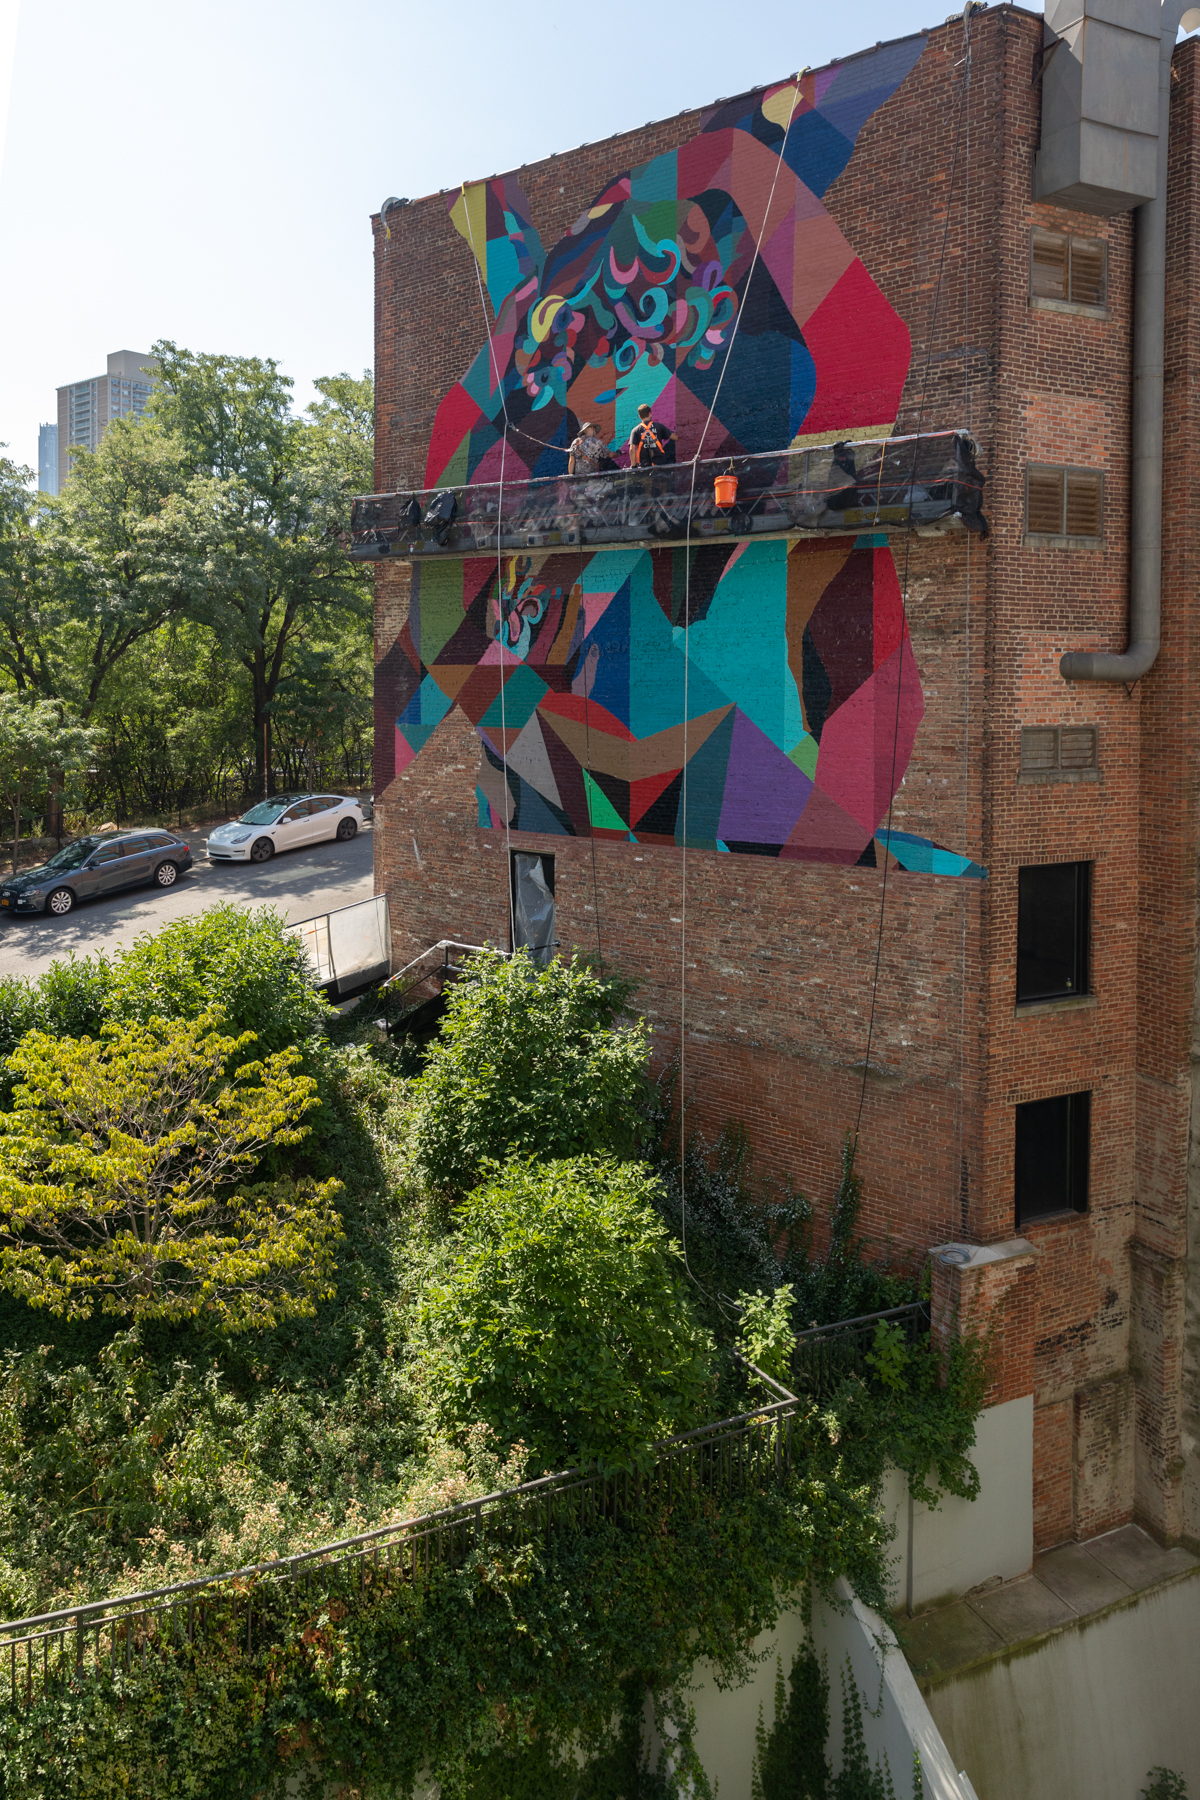 Colossal Media hand-painted mural in Dumbo Brooklyn, NY, with art by Finley.